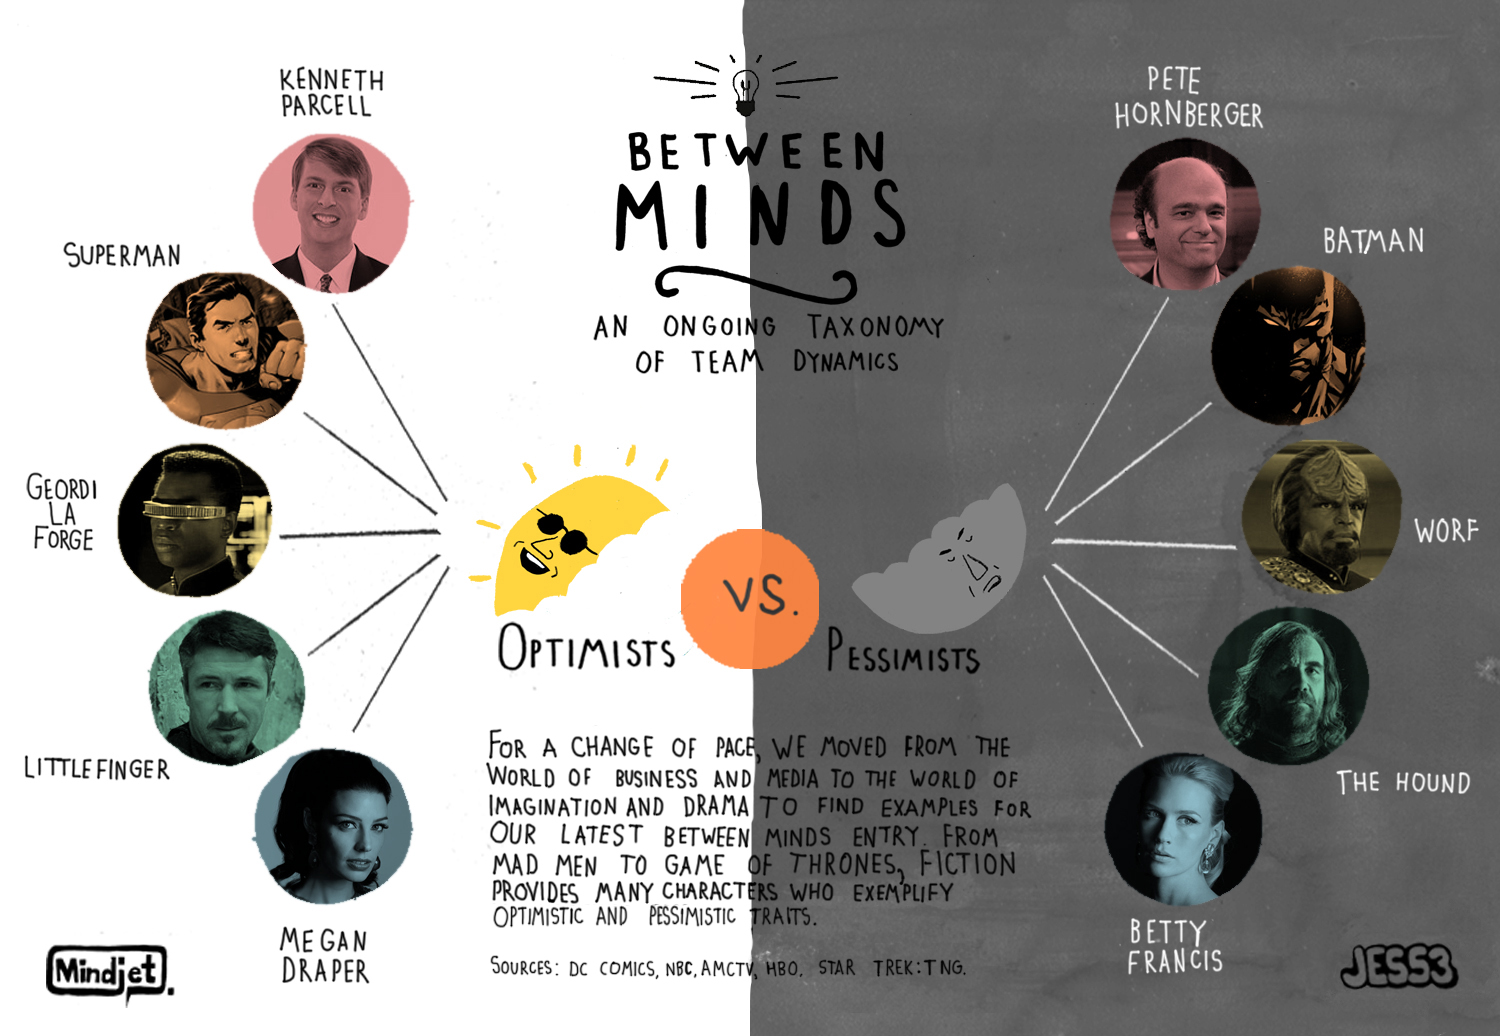 Between Kenneth and Worf: Optimists vs Pessimists